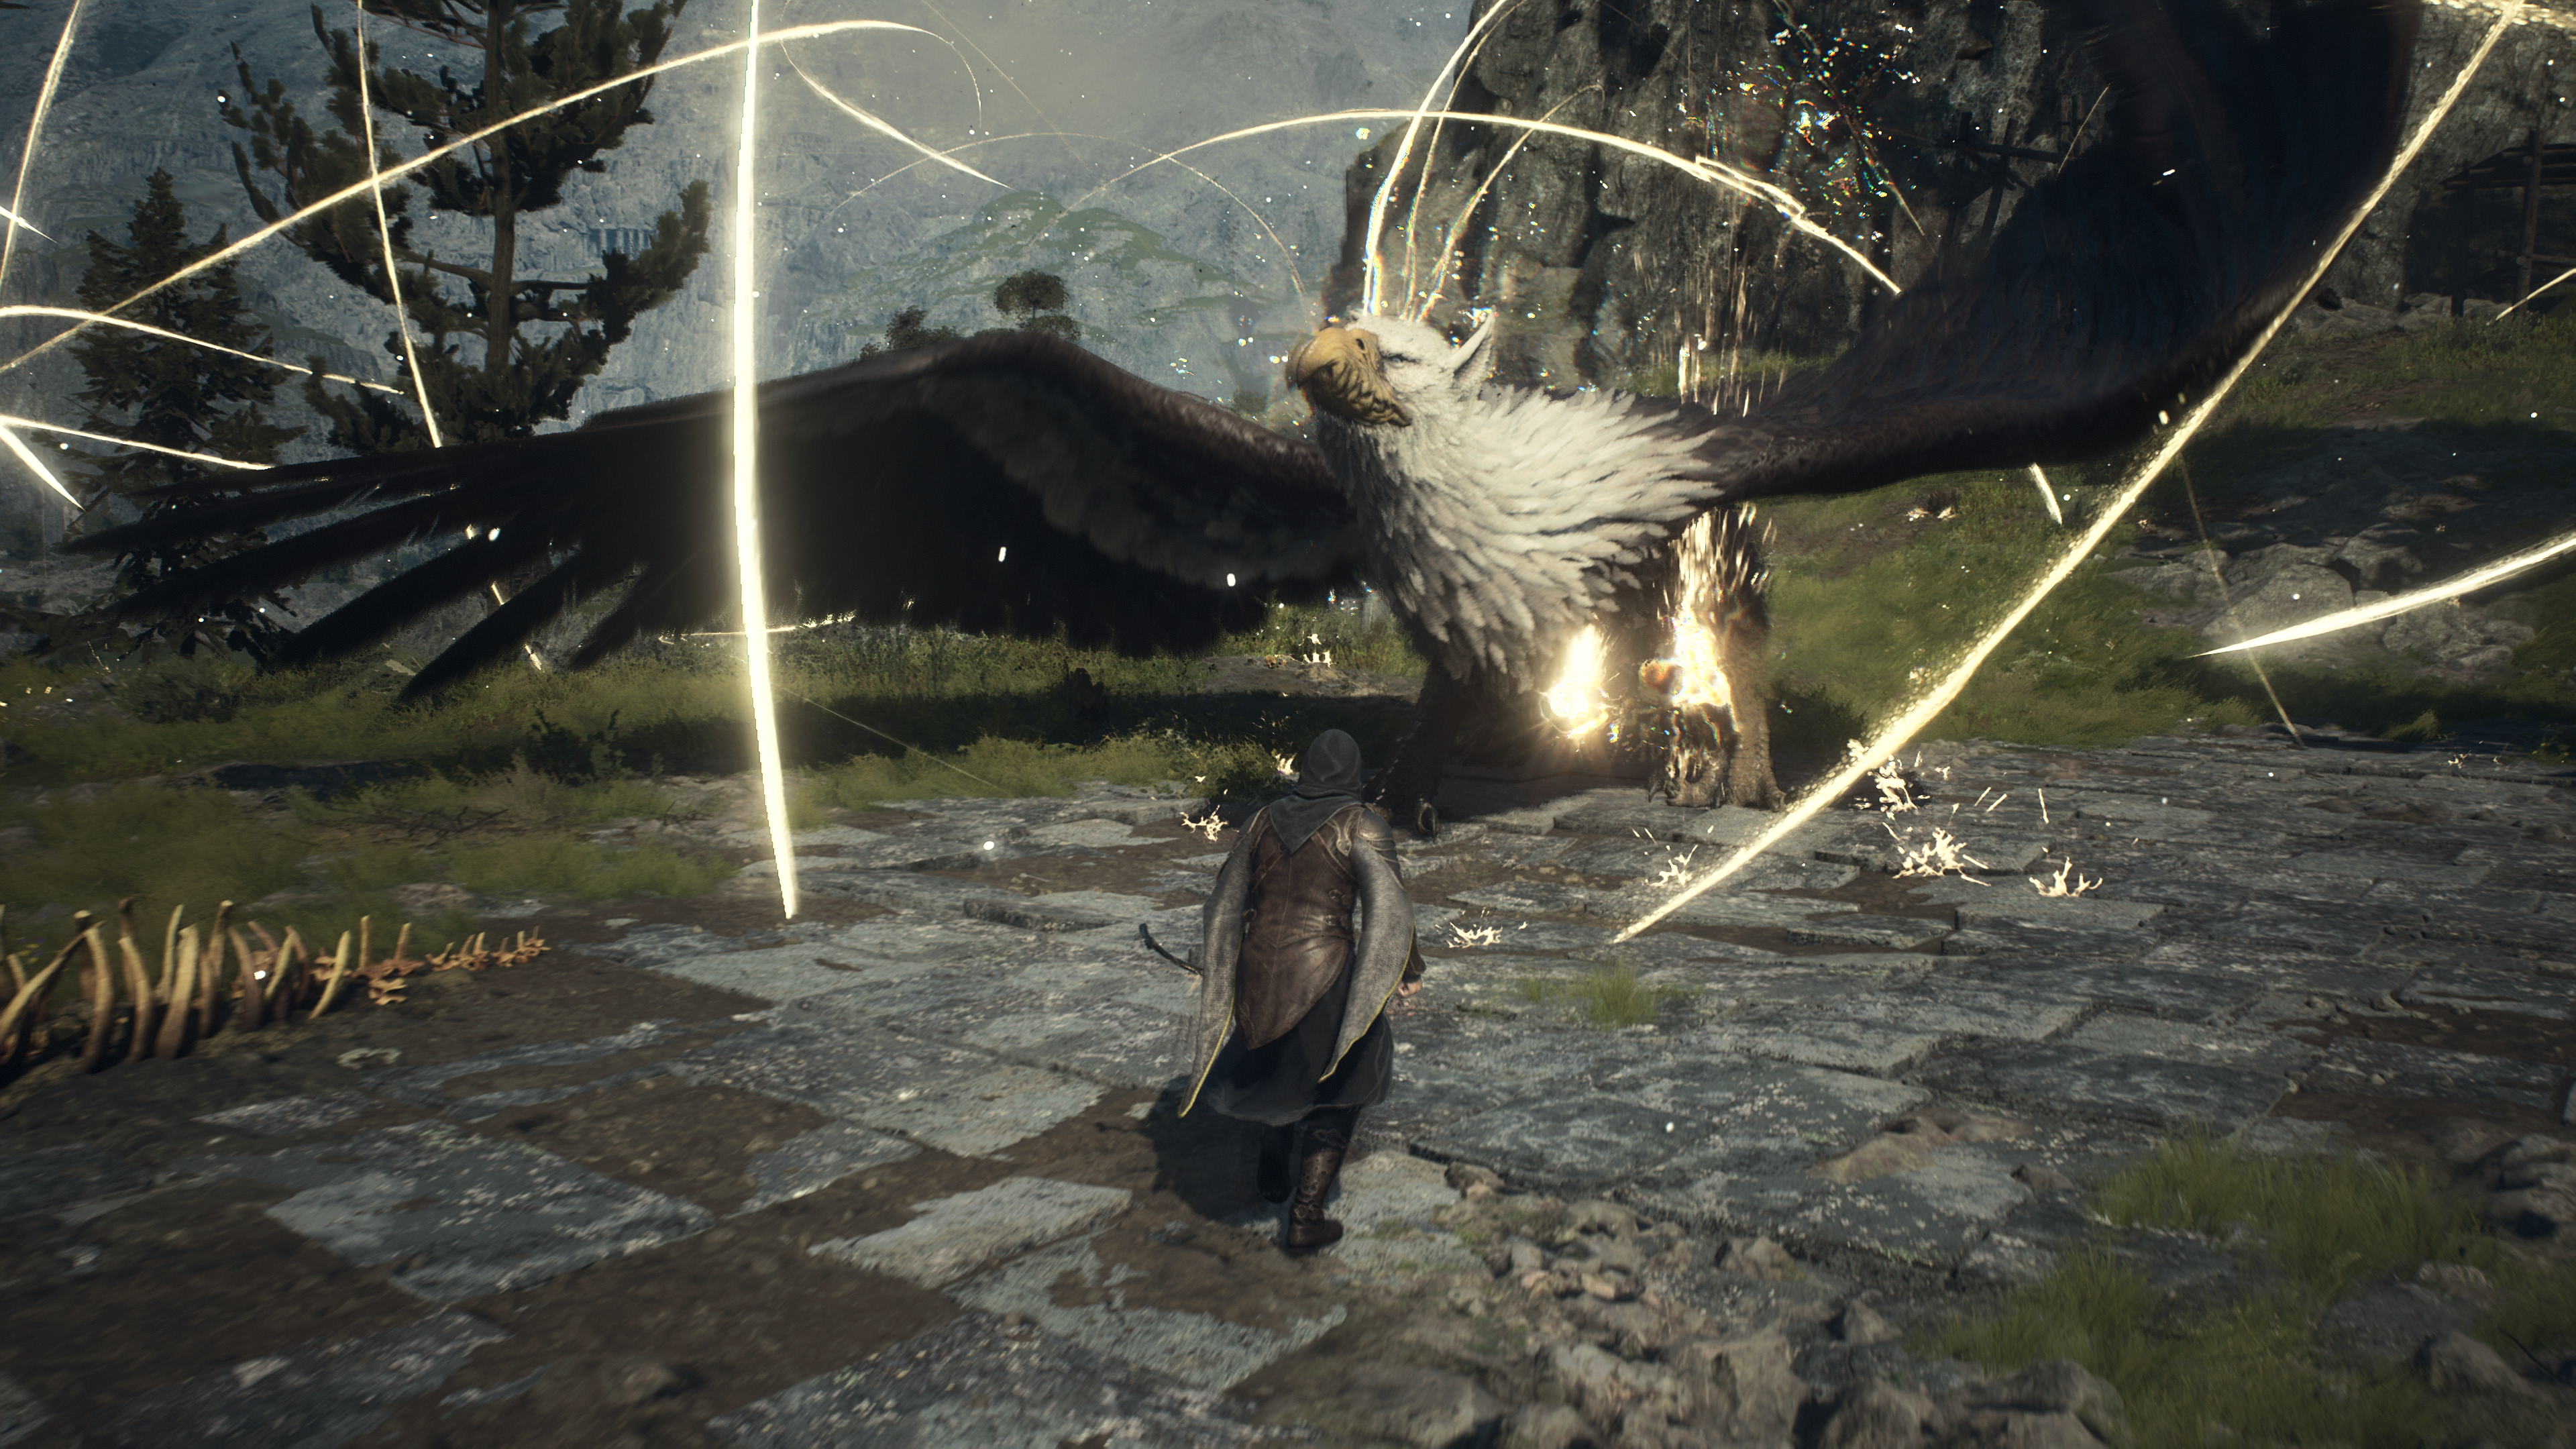 Dragon's Dogma 2 Development Is Progressing Well; Director Hopes To Share  News Soon